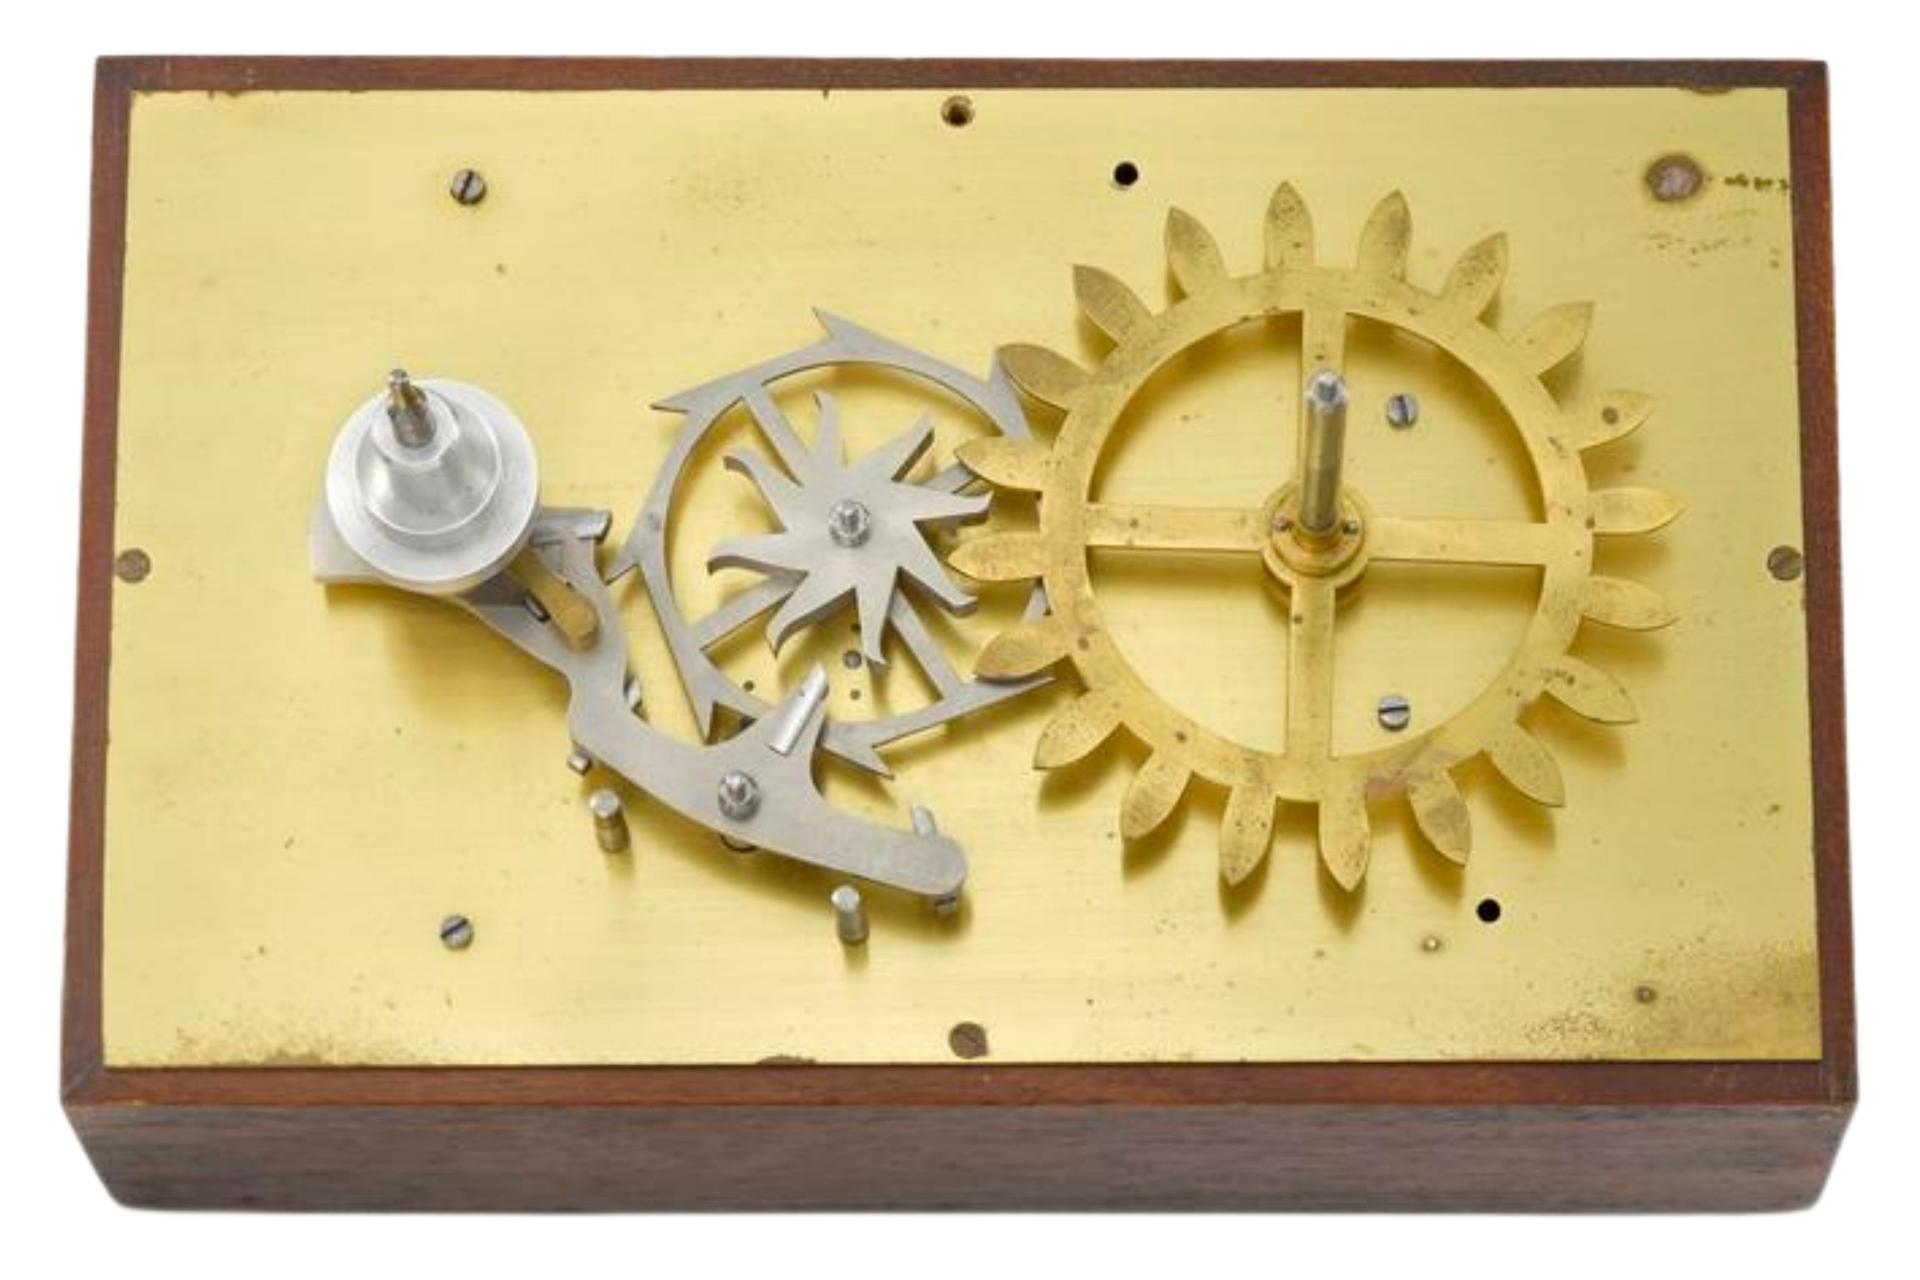 An electrically powered demonstration model of the Co-Axial escapement, designed by George Daniels, circa 1985